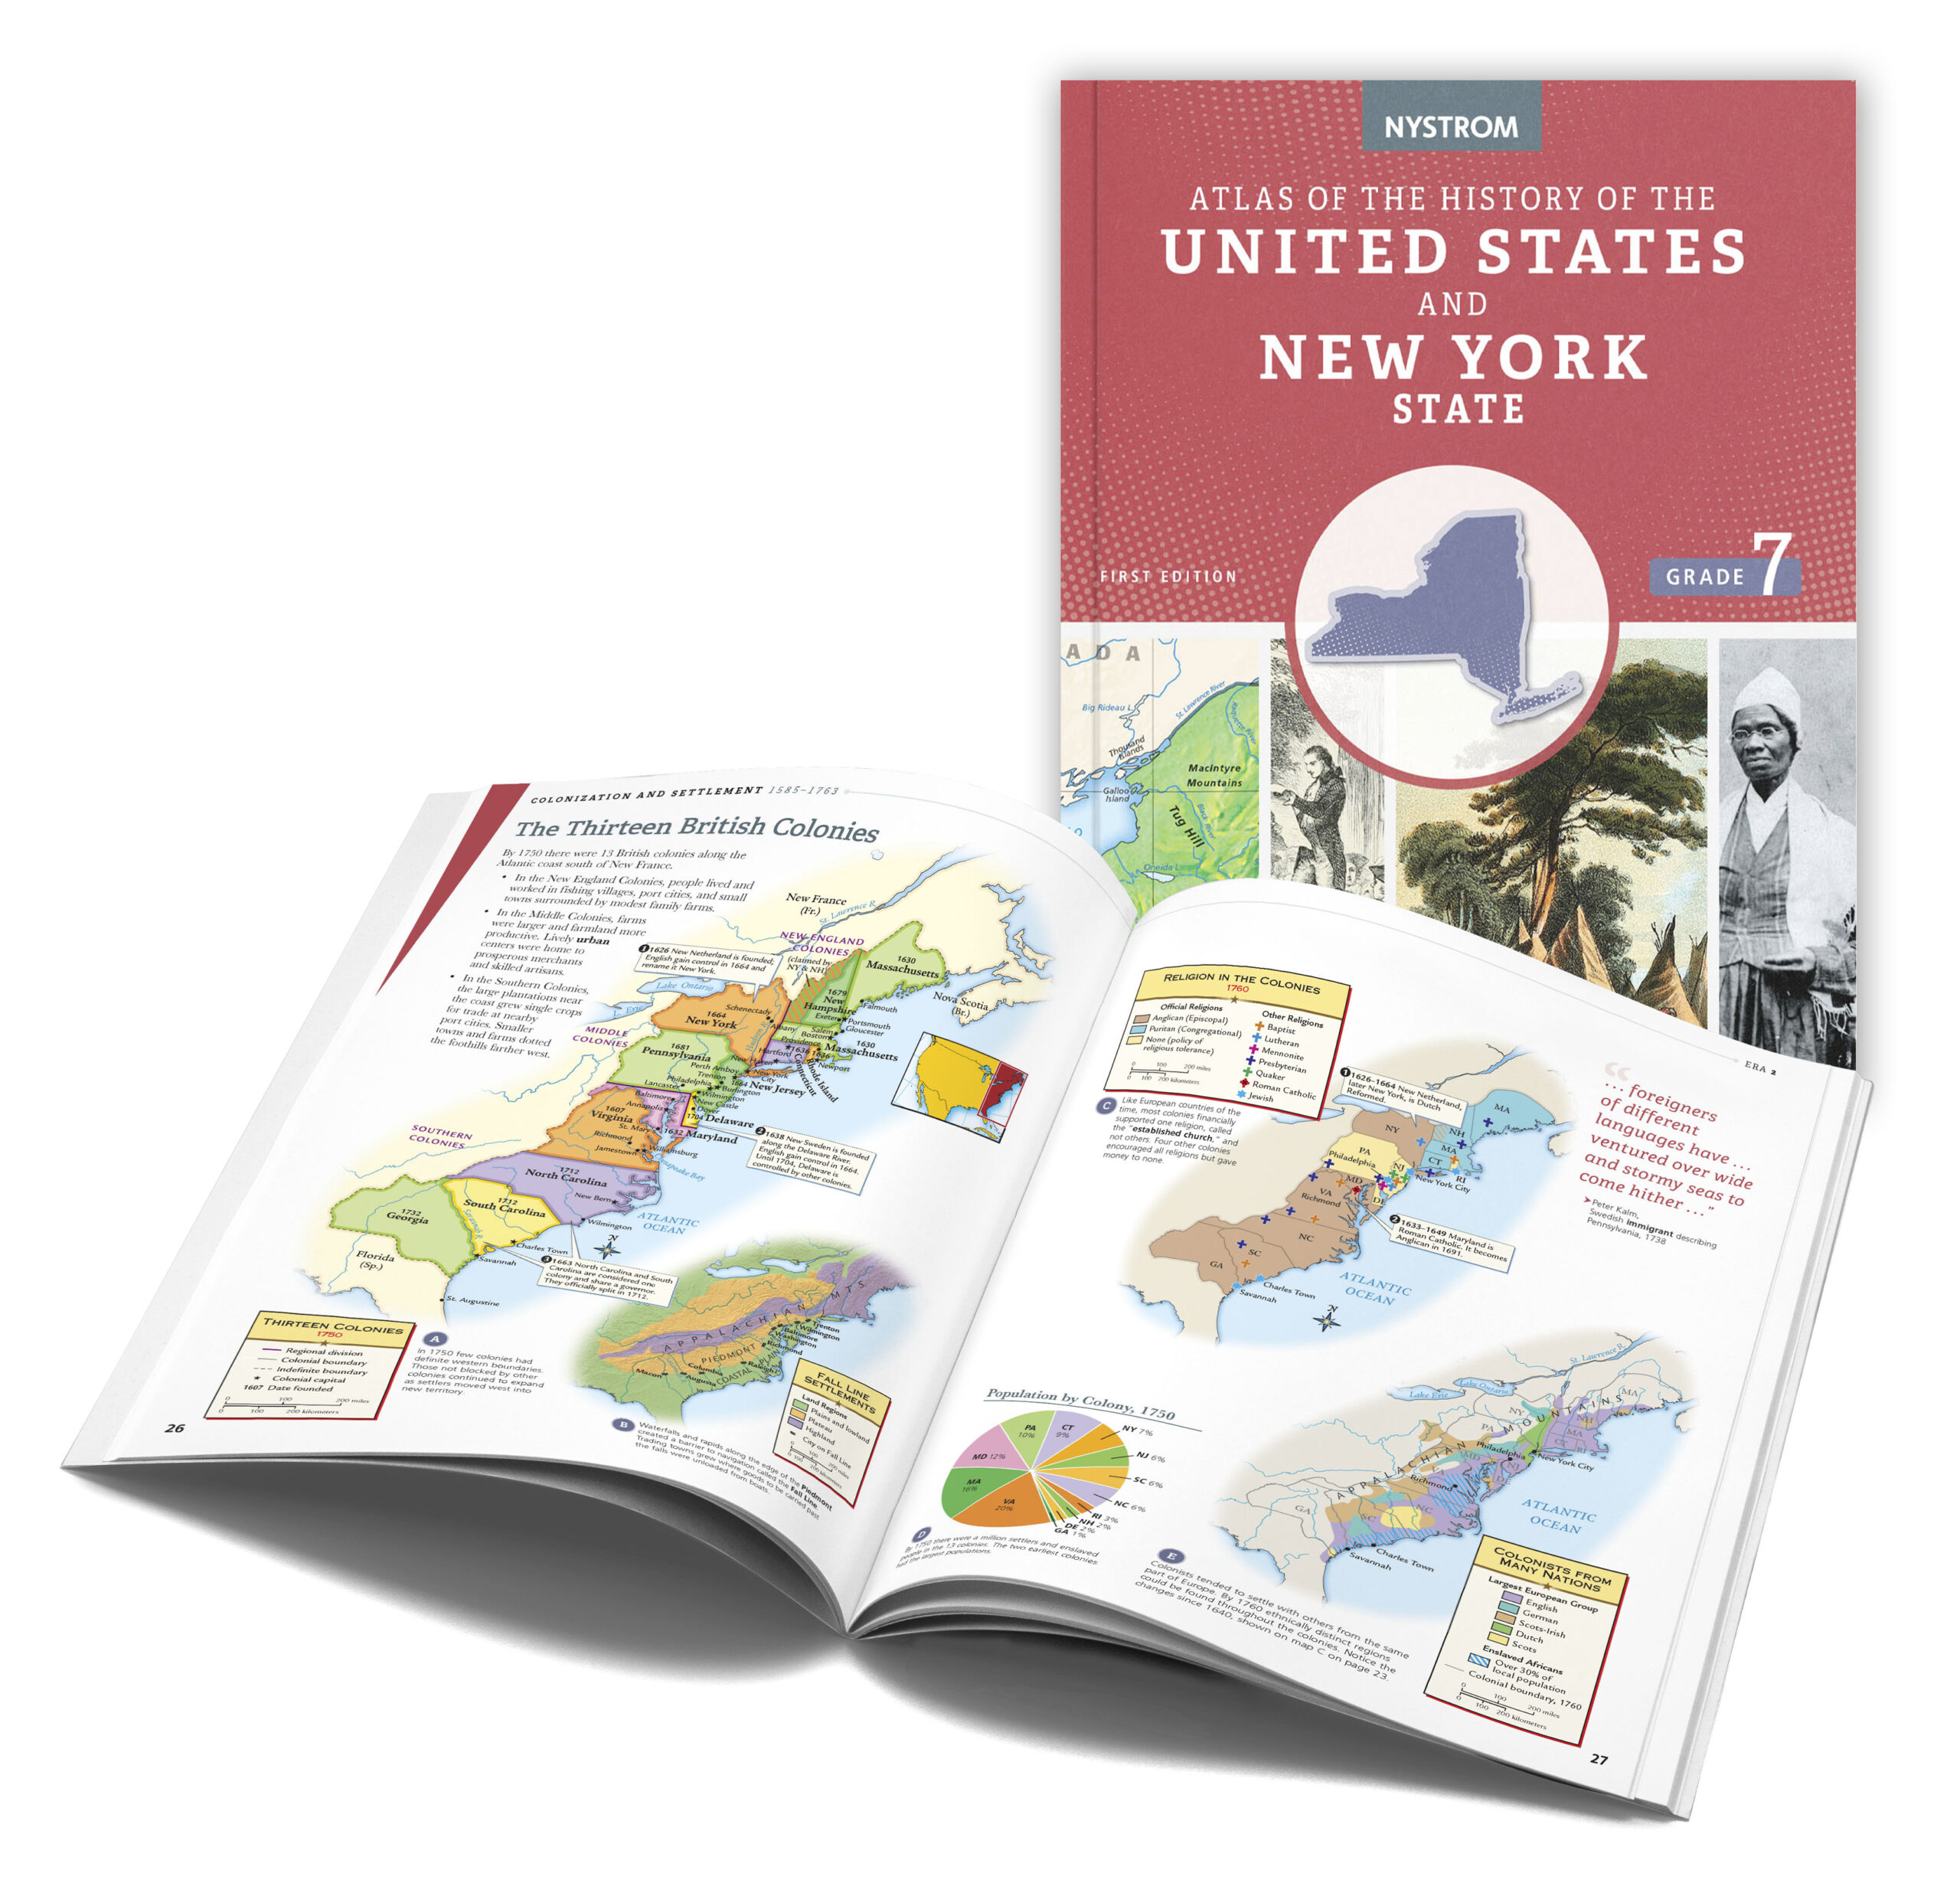 Atlas of the History of the US and NY cover and inside spread